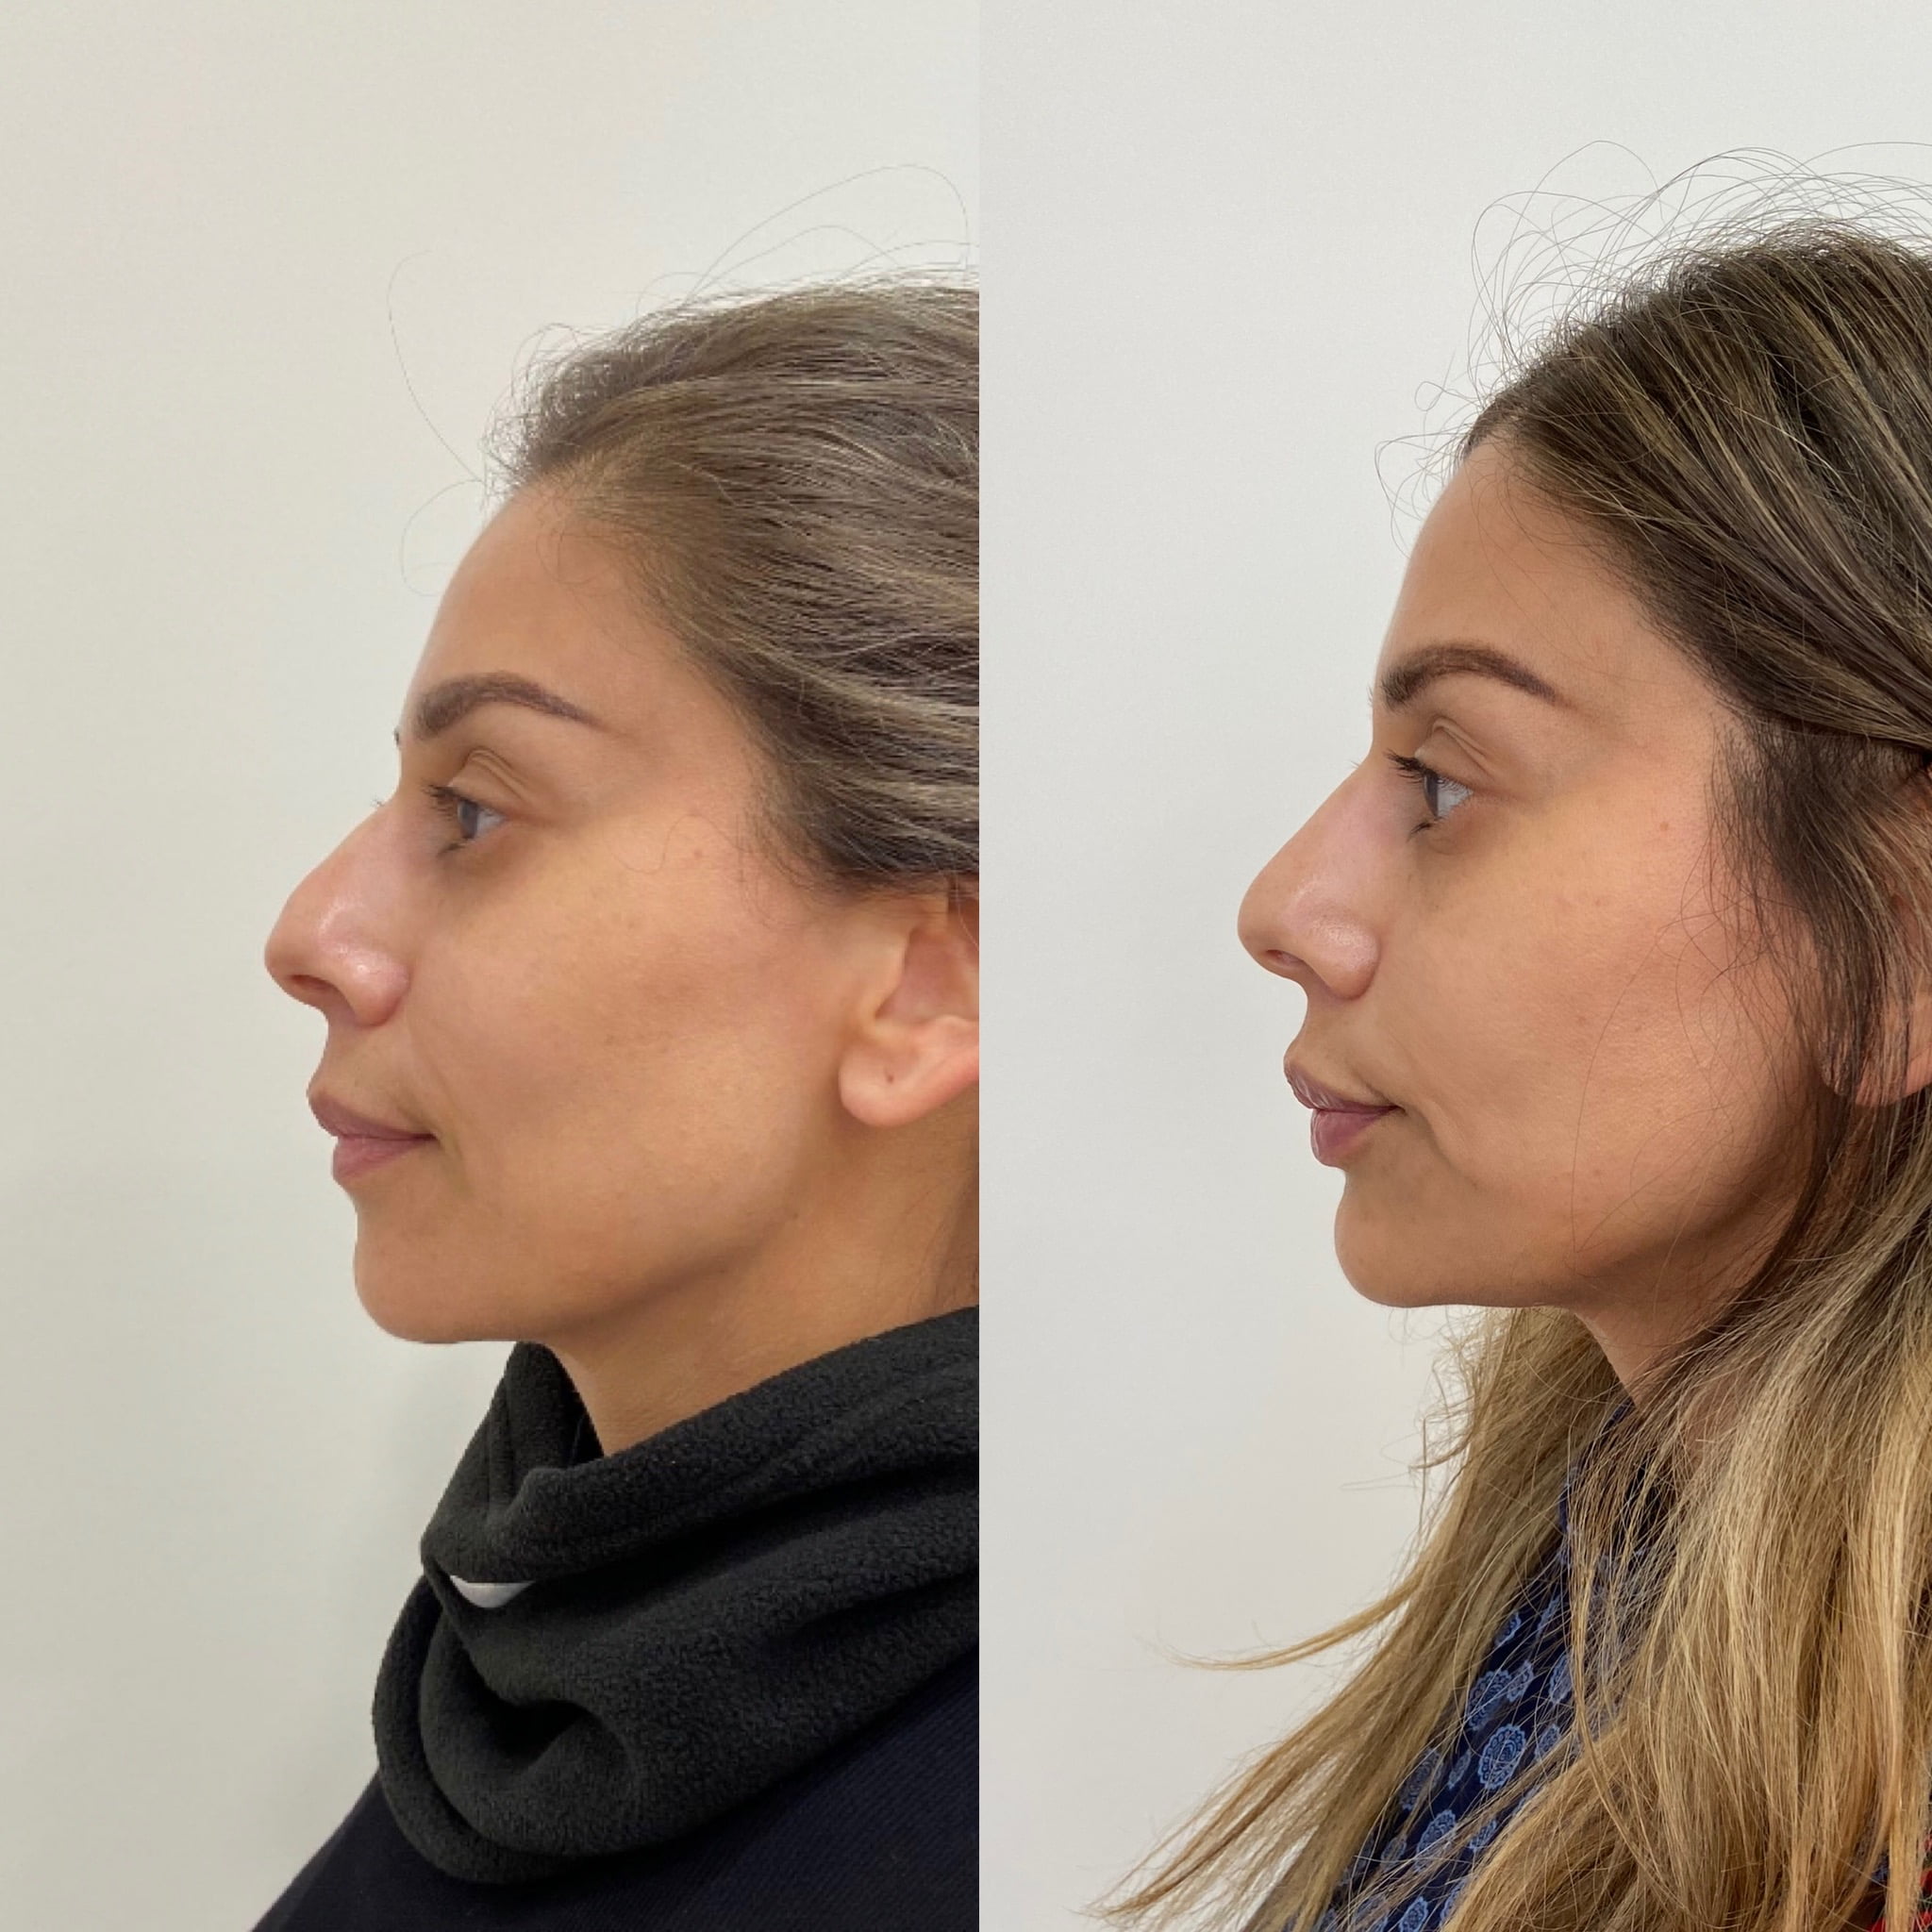 Before and After Fillers treatment on Nose | Beauty Boost Med Spa at Newport Beach, CA